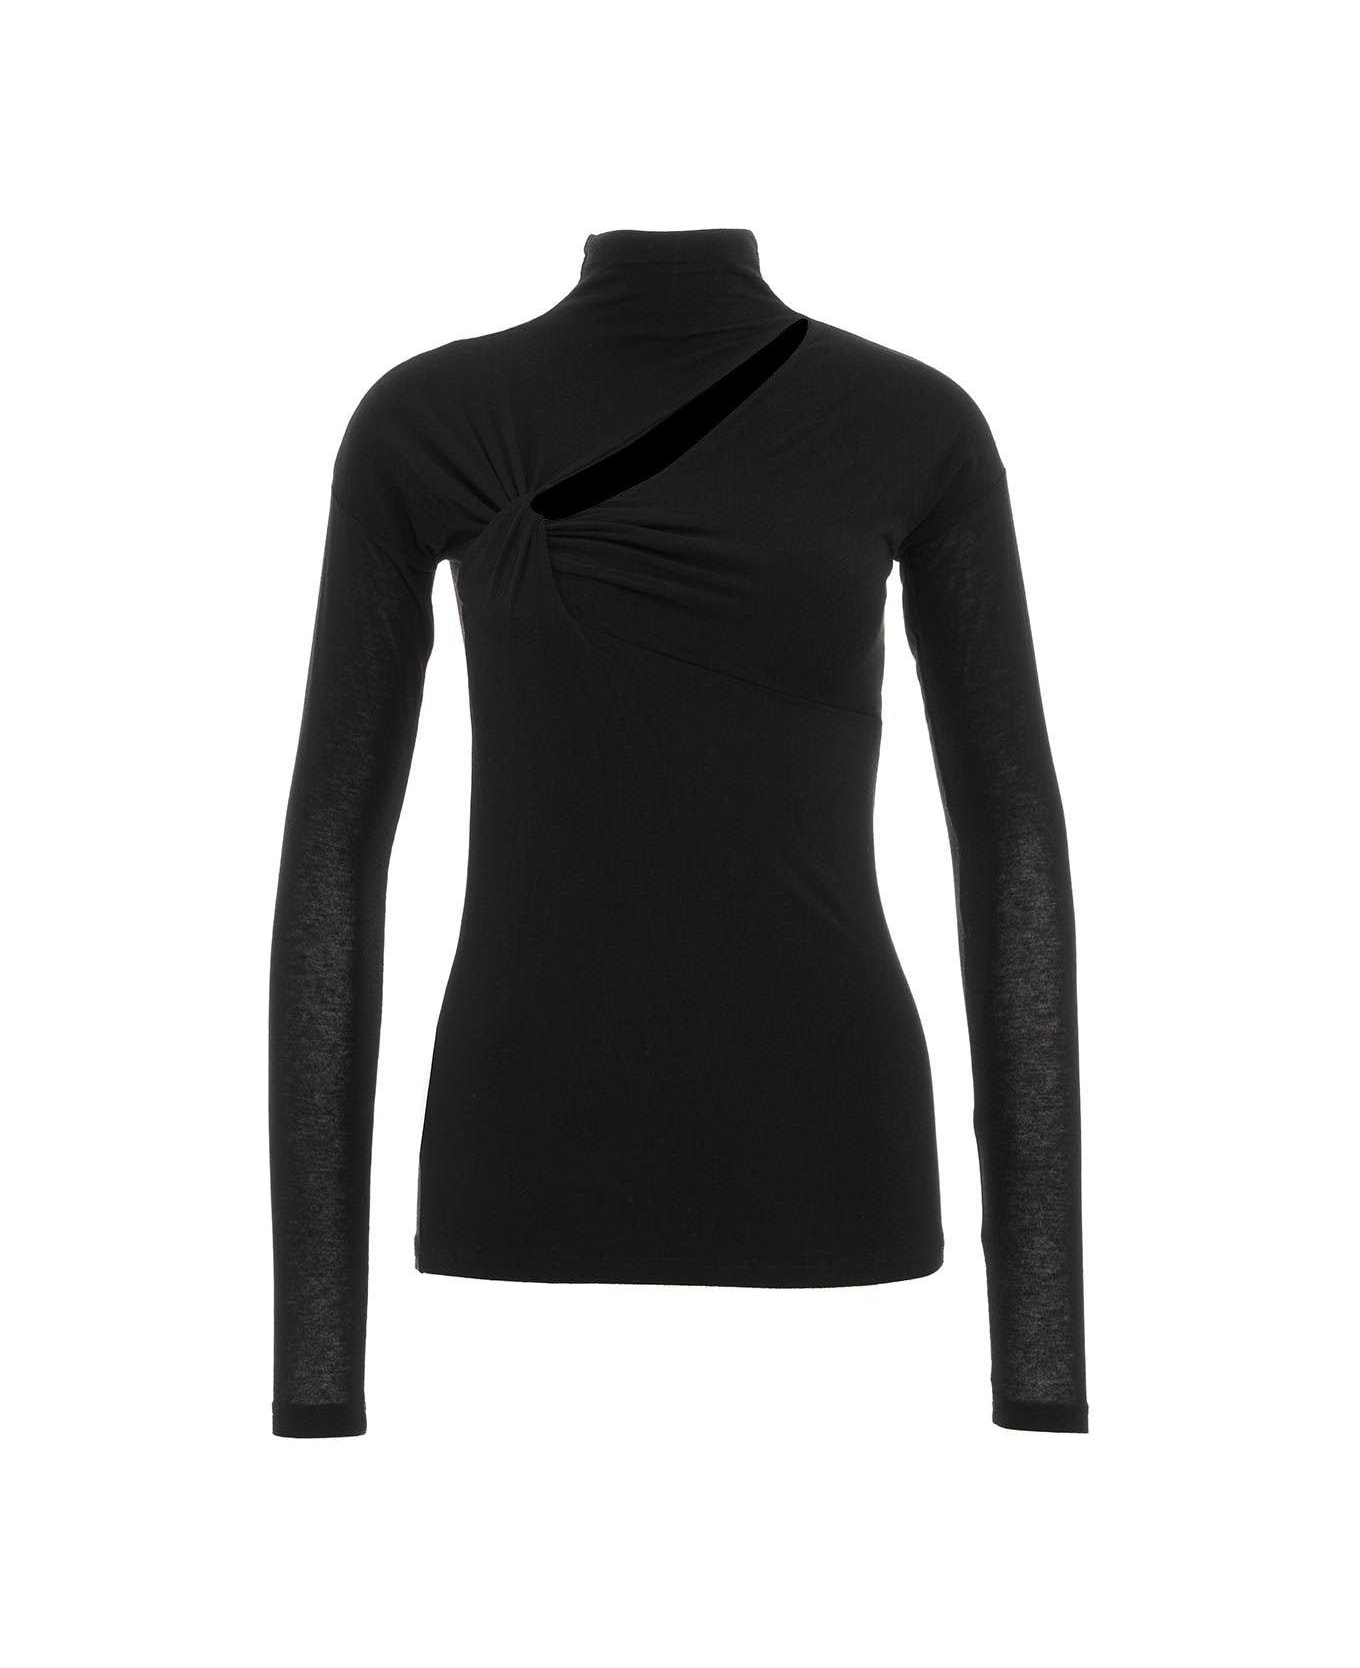 Pinko Cut-out Detail Longsleeved Top - Nero